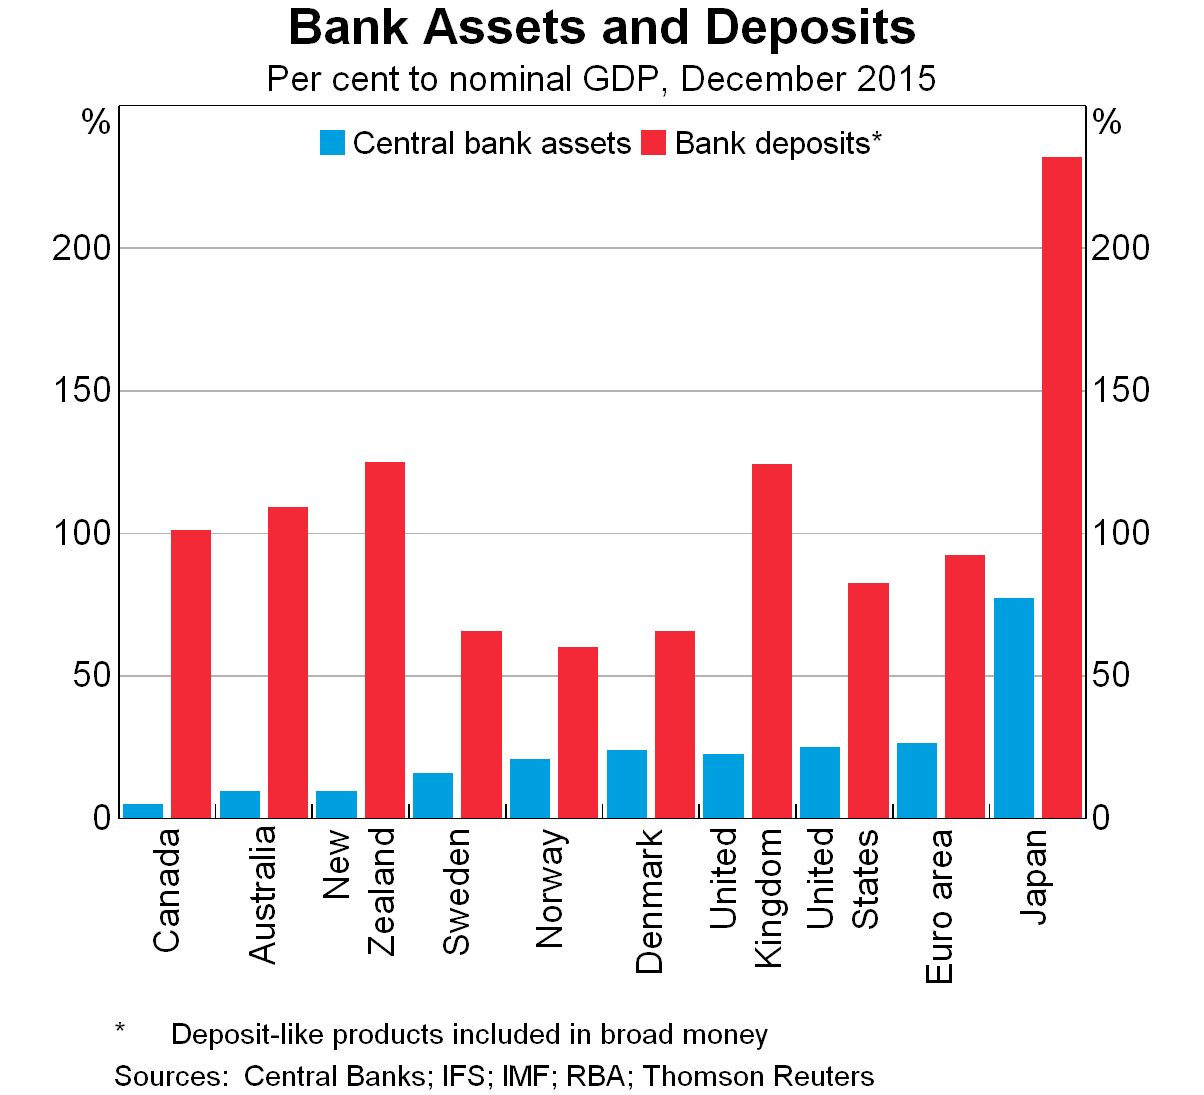 Graph 3: Bank Assets and Deposits